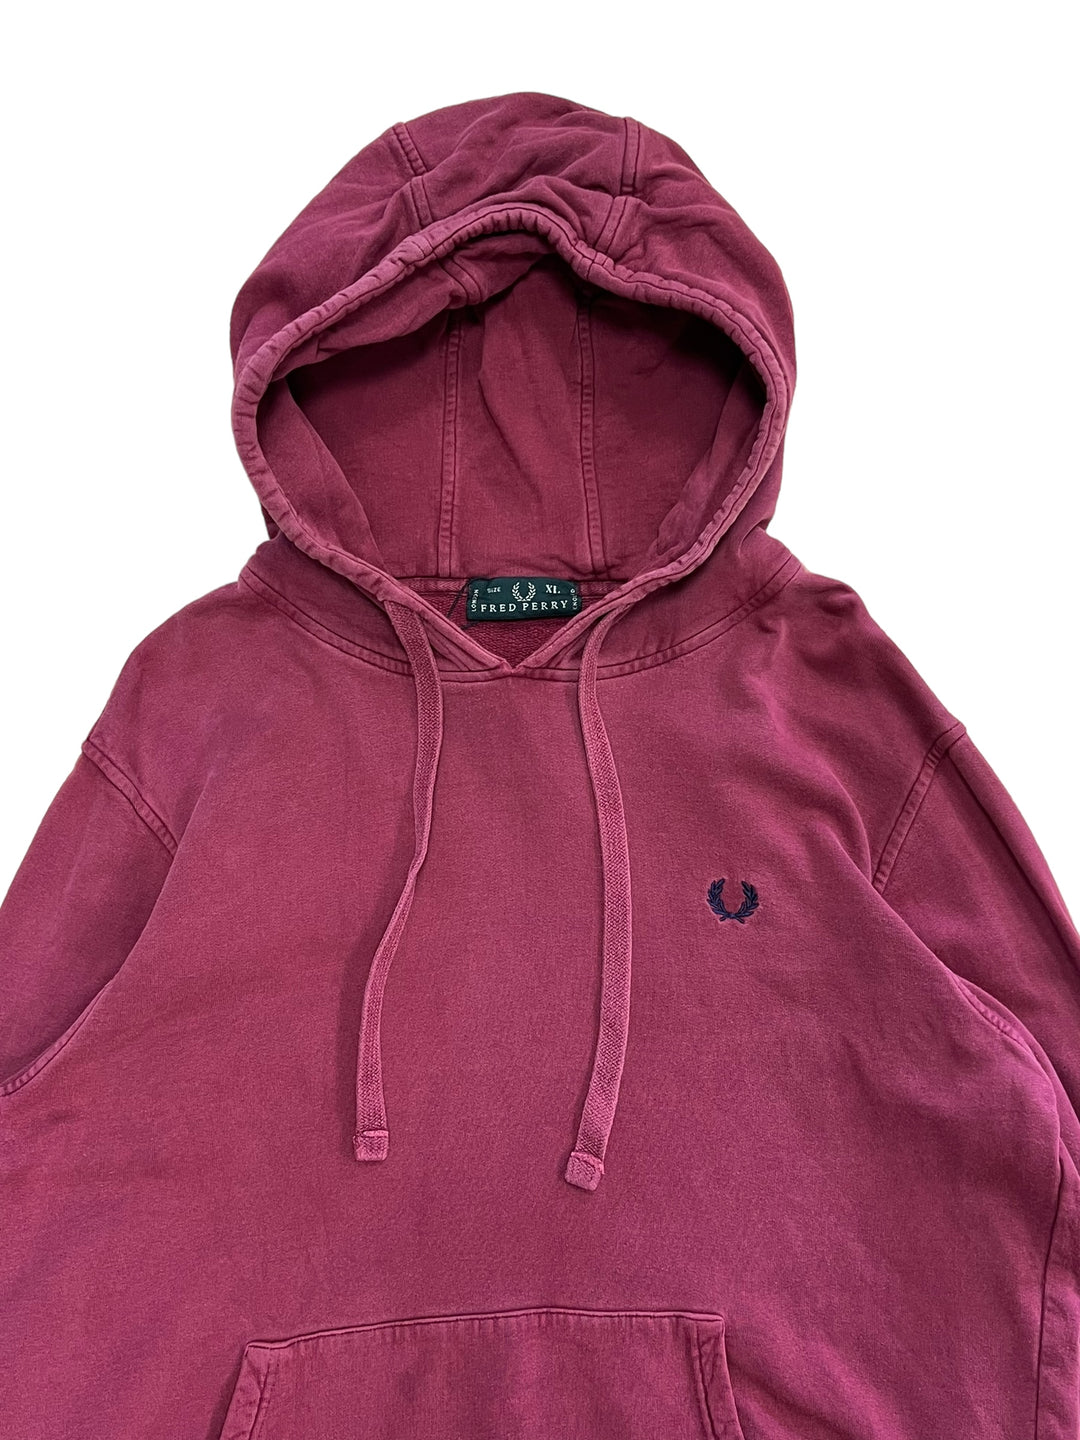 Fred Perry Hoodie Women's Extra Large Slim Fit